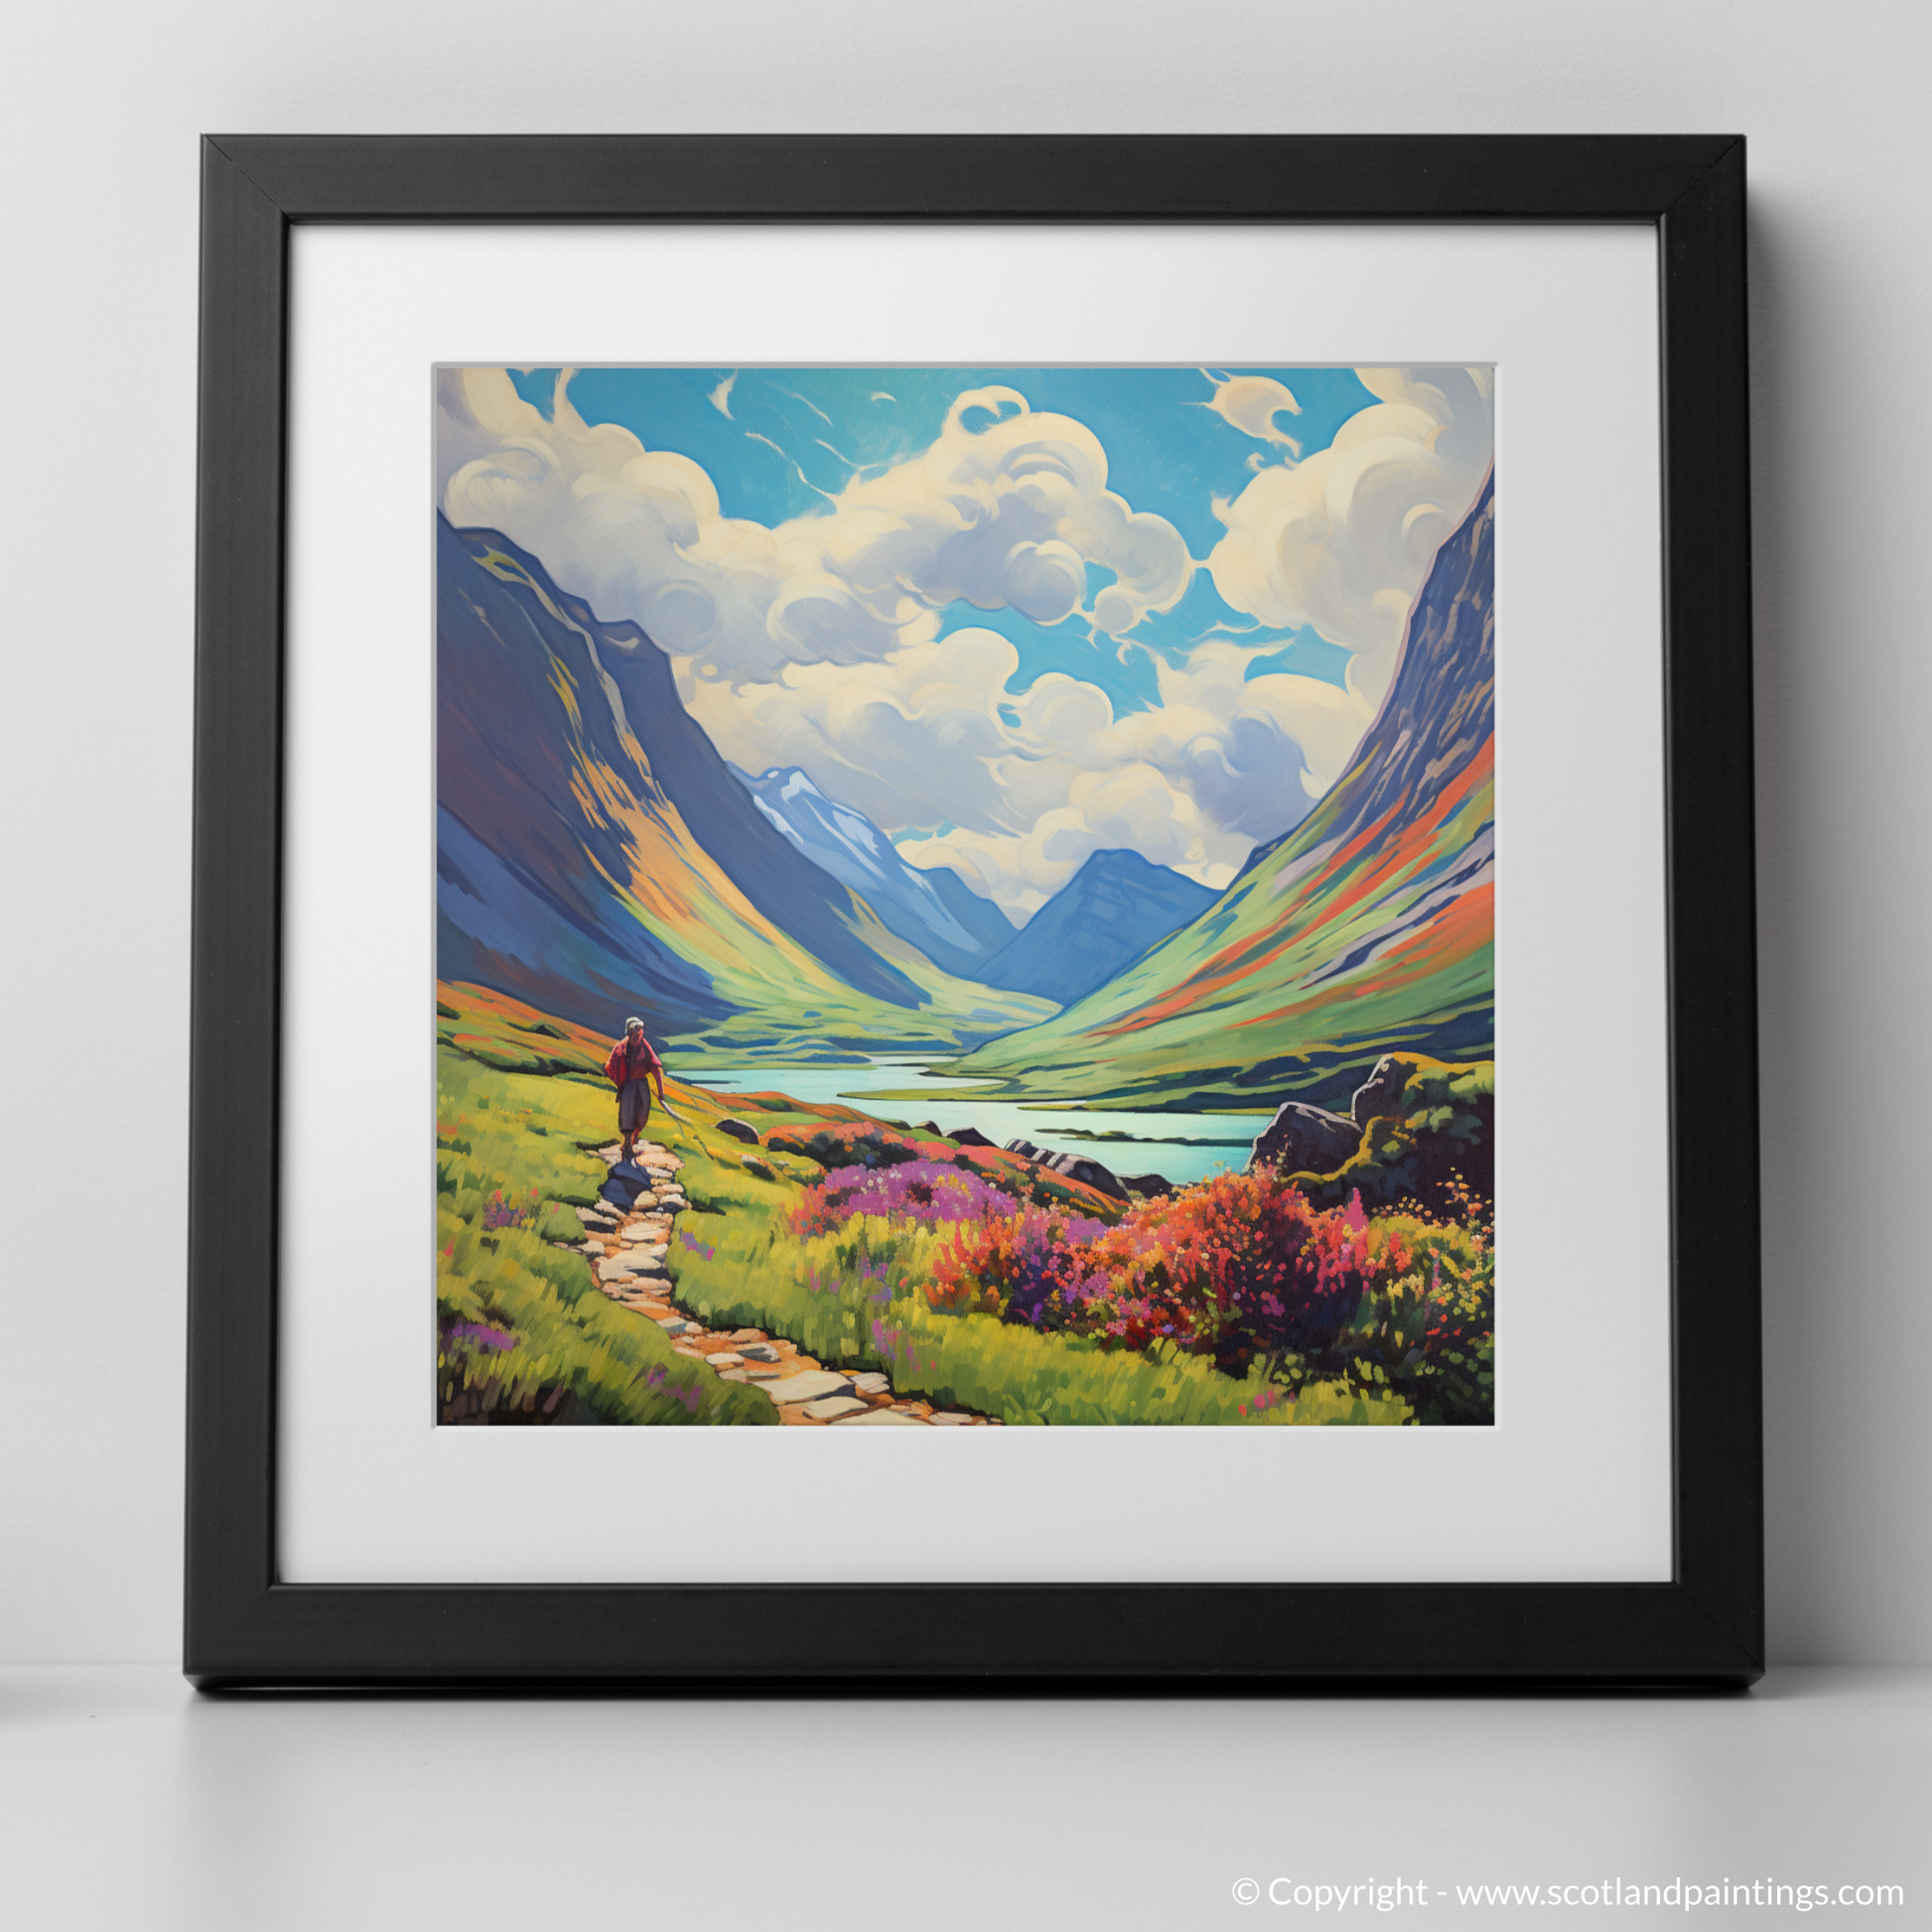 Art Print of Lone hiker in Glencoe during summer with a black frame